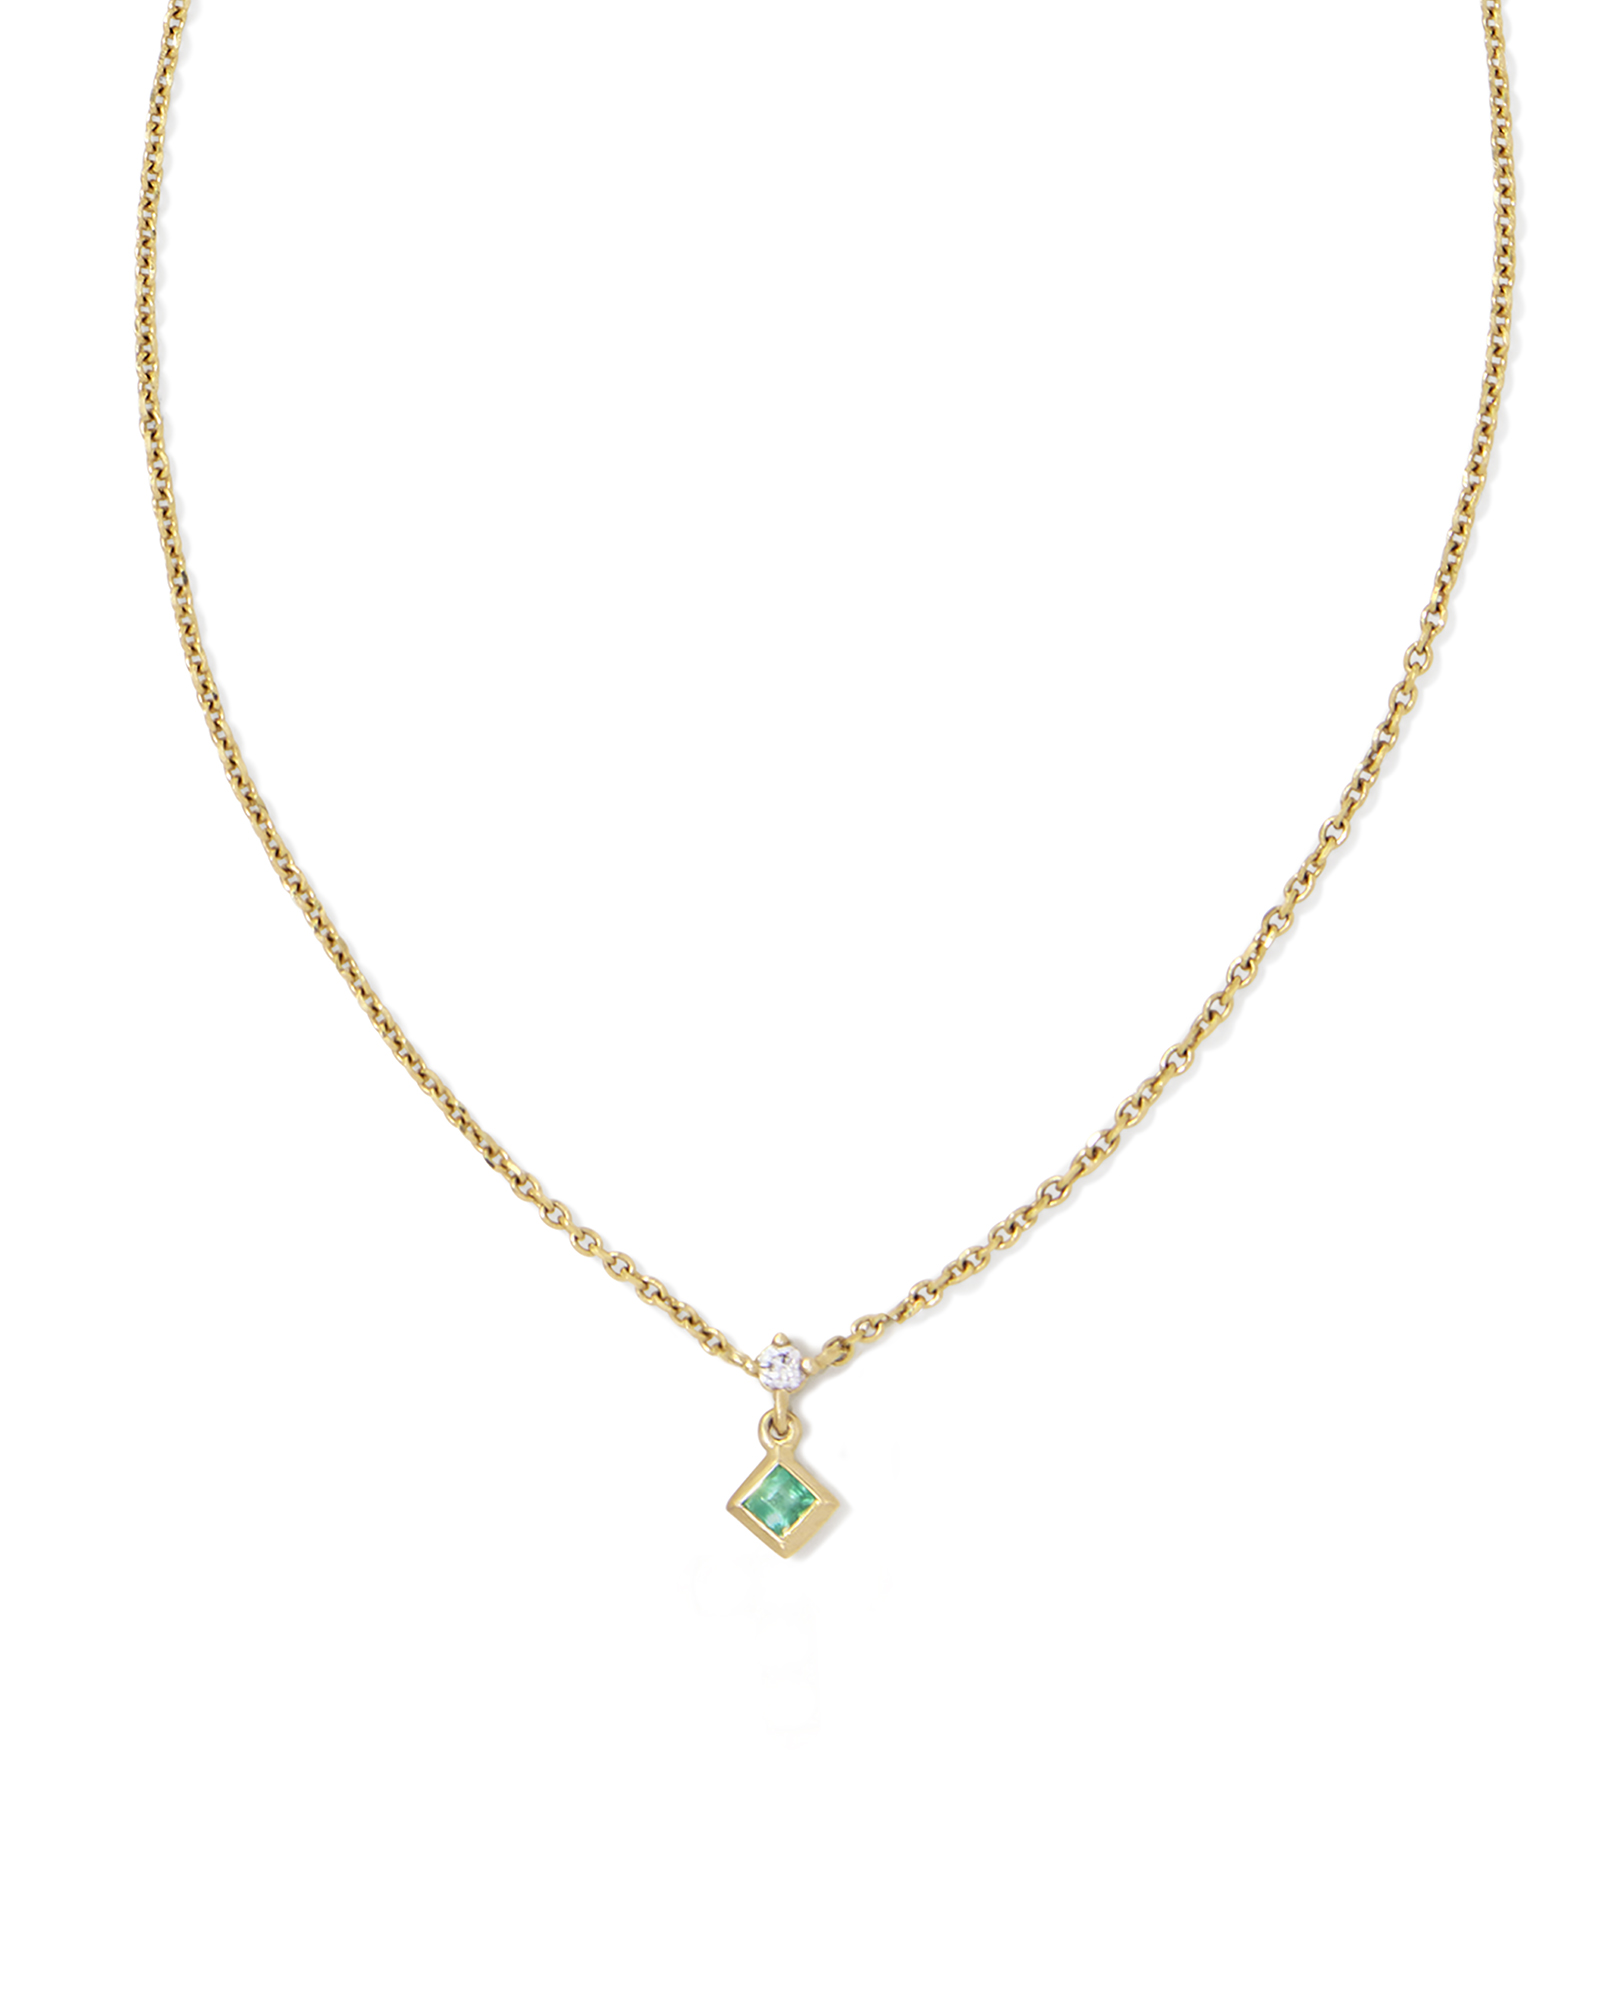 New Kendra Scott Tory Marquis Station Necklace Gold & Cats Eye Emerald  Green | eBay